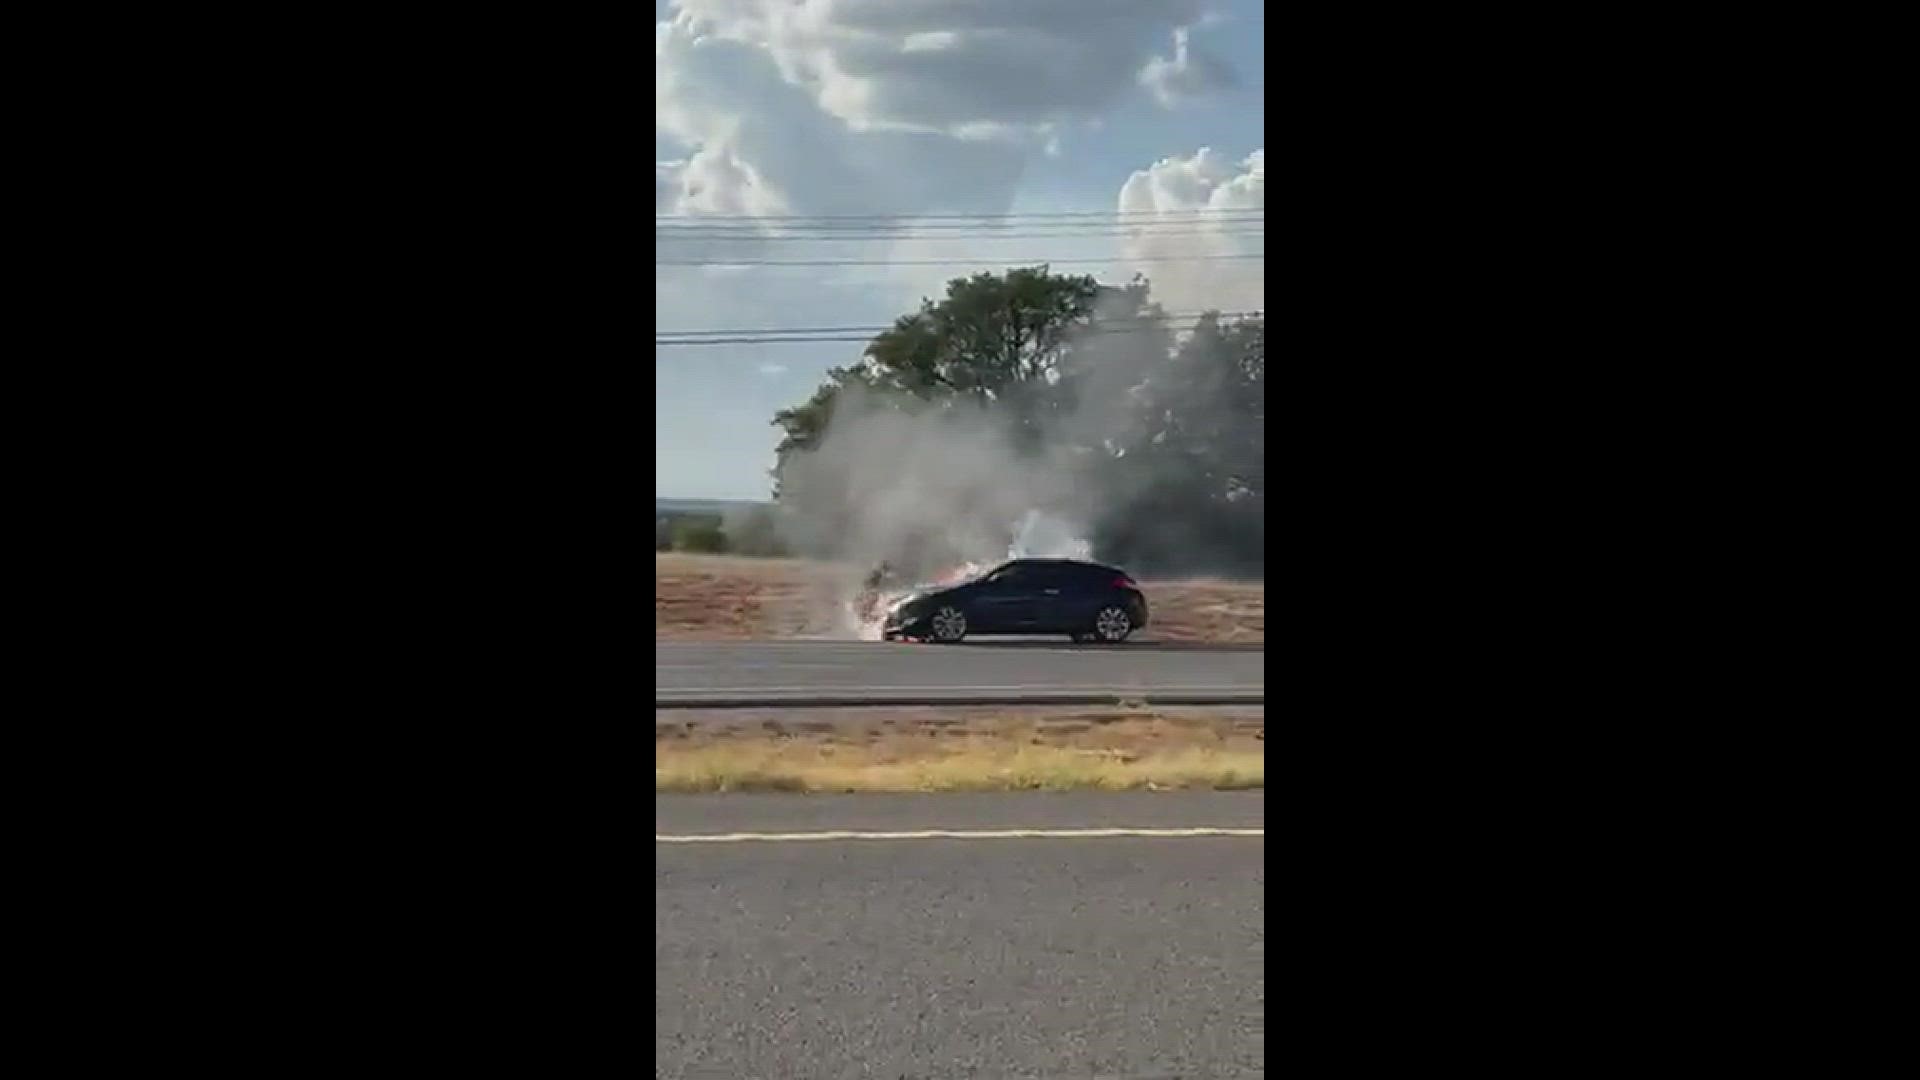 Viewer Harry Sanchez sent a video of a car caught on fire in Killeen.
Credit: Harry Sanchez